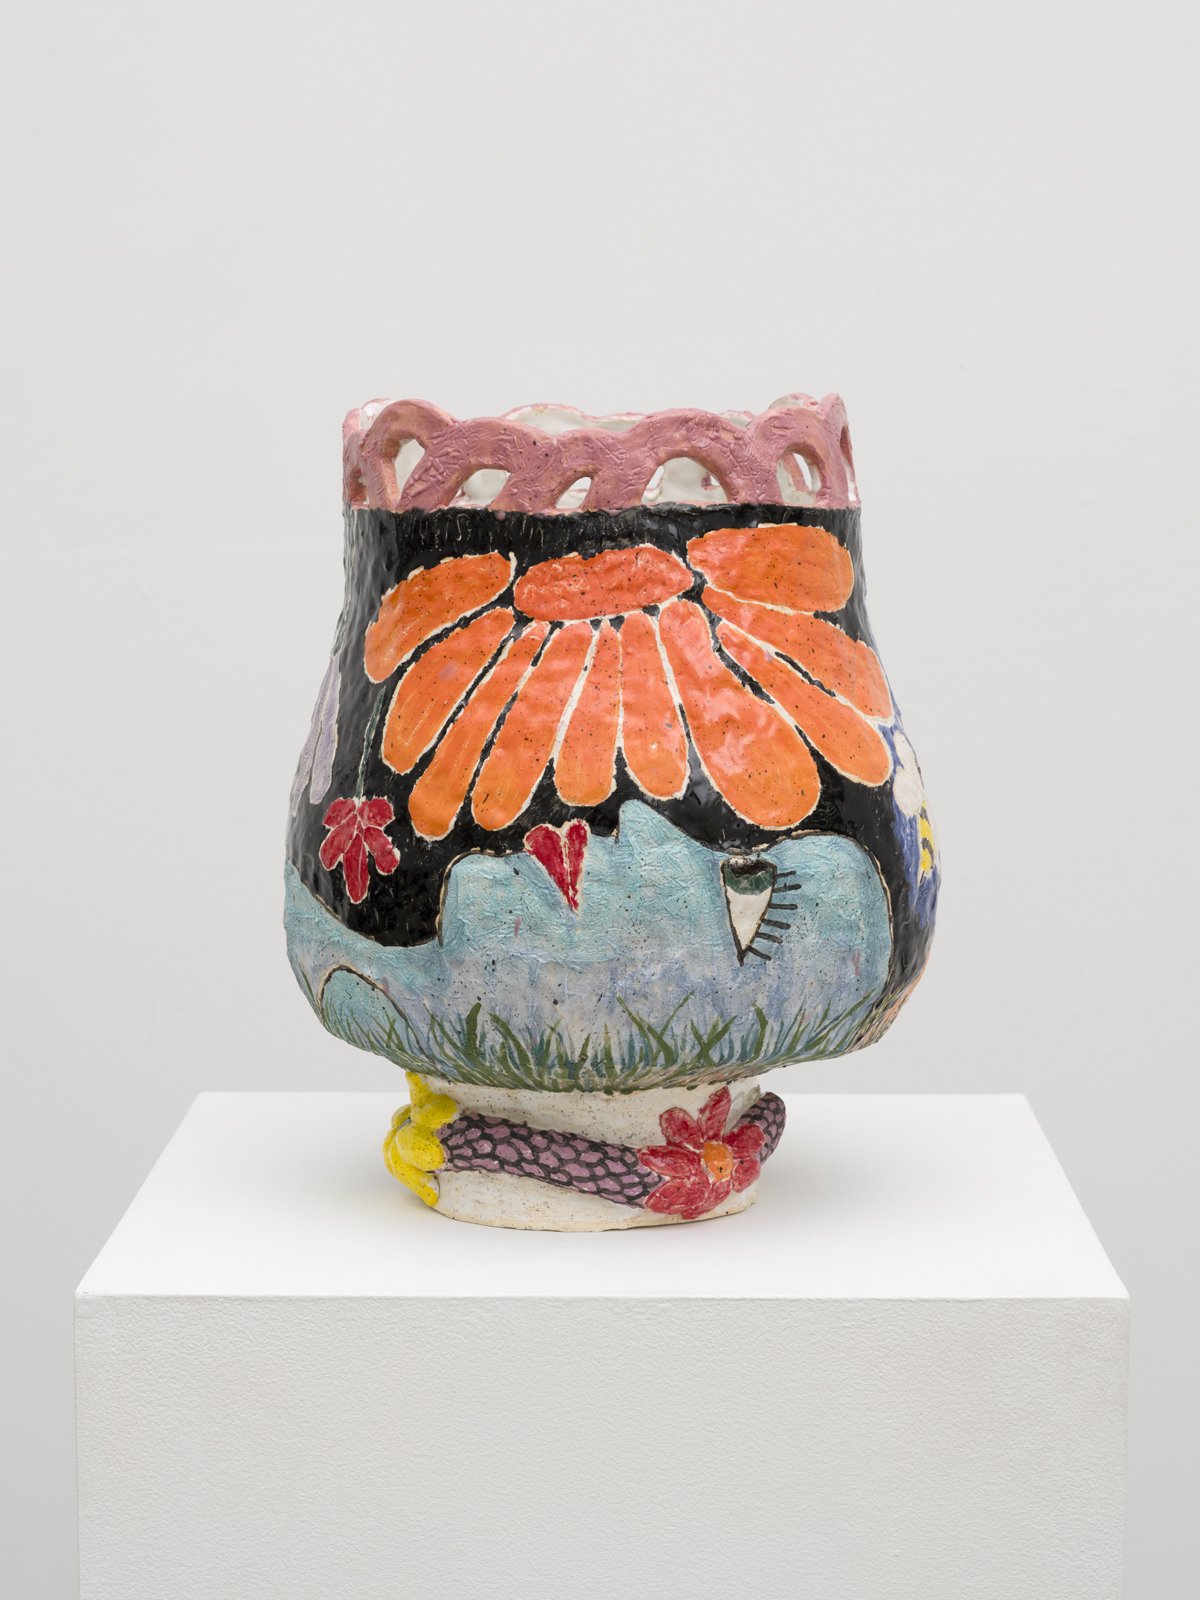  Jennifer King  P navigates the space time continuum, 2023  Stoneware and glaze  17 x 12 x 11 in. 